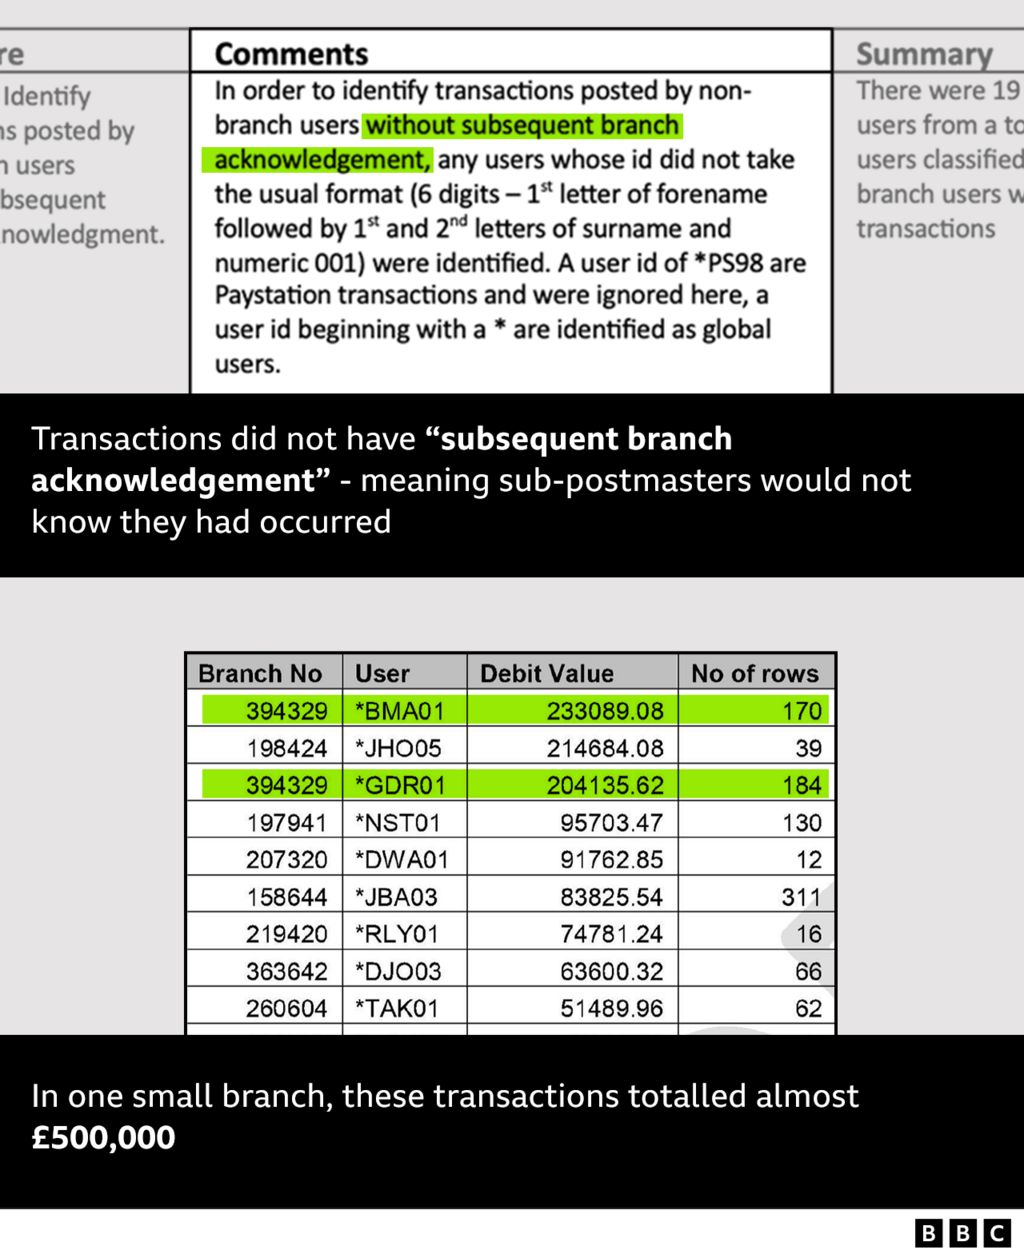 Excerpts from the draft report showing transactions did not have "subsequent branch acknowledgment" - meaning sub-postmasters would not know they occurred. In one small branch, these transactions totalled almost £500,000